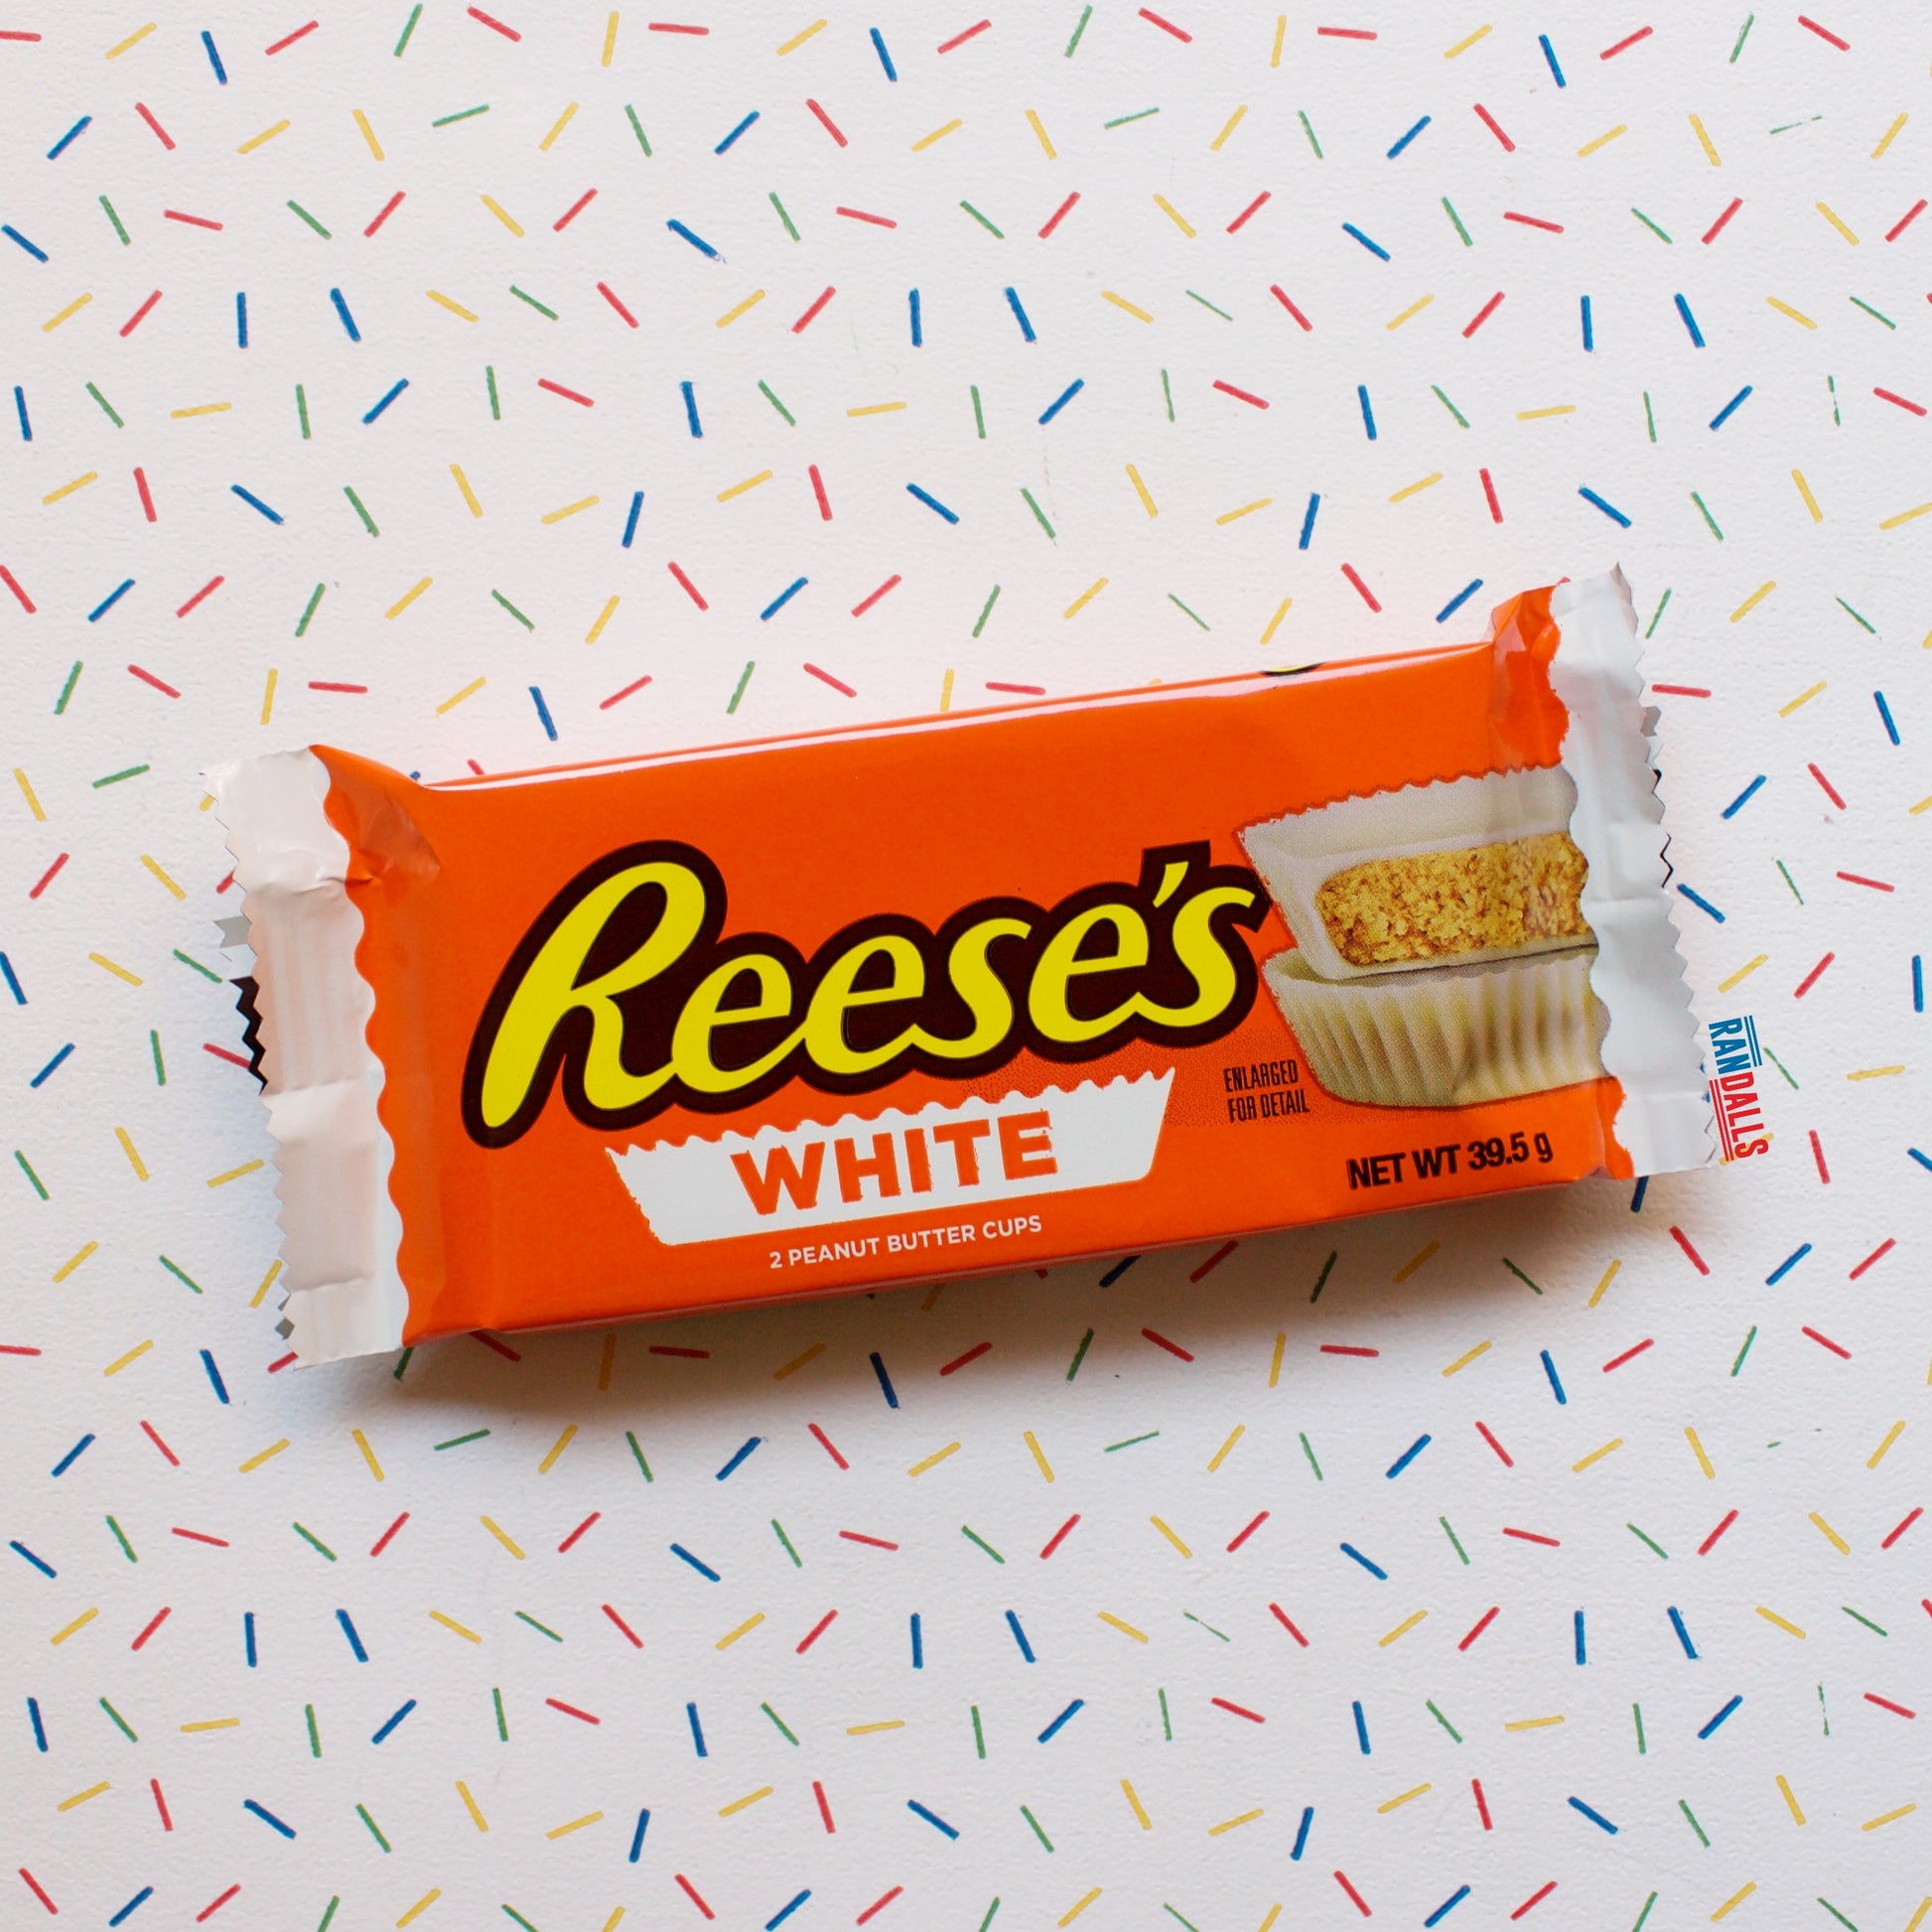 reese's white chocolate cups, chocolate, peanut butter, usa, randalls